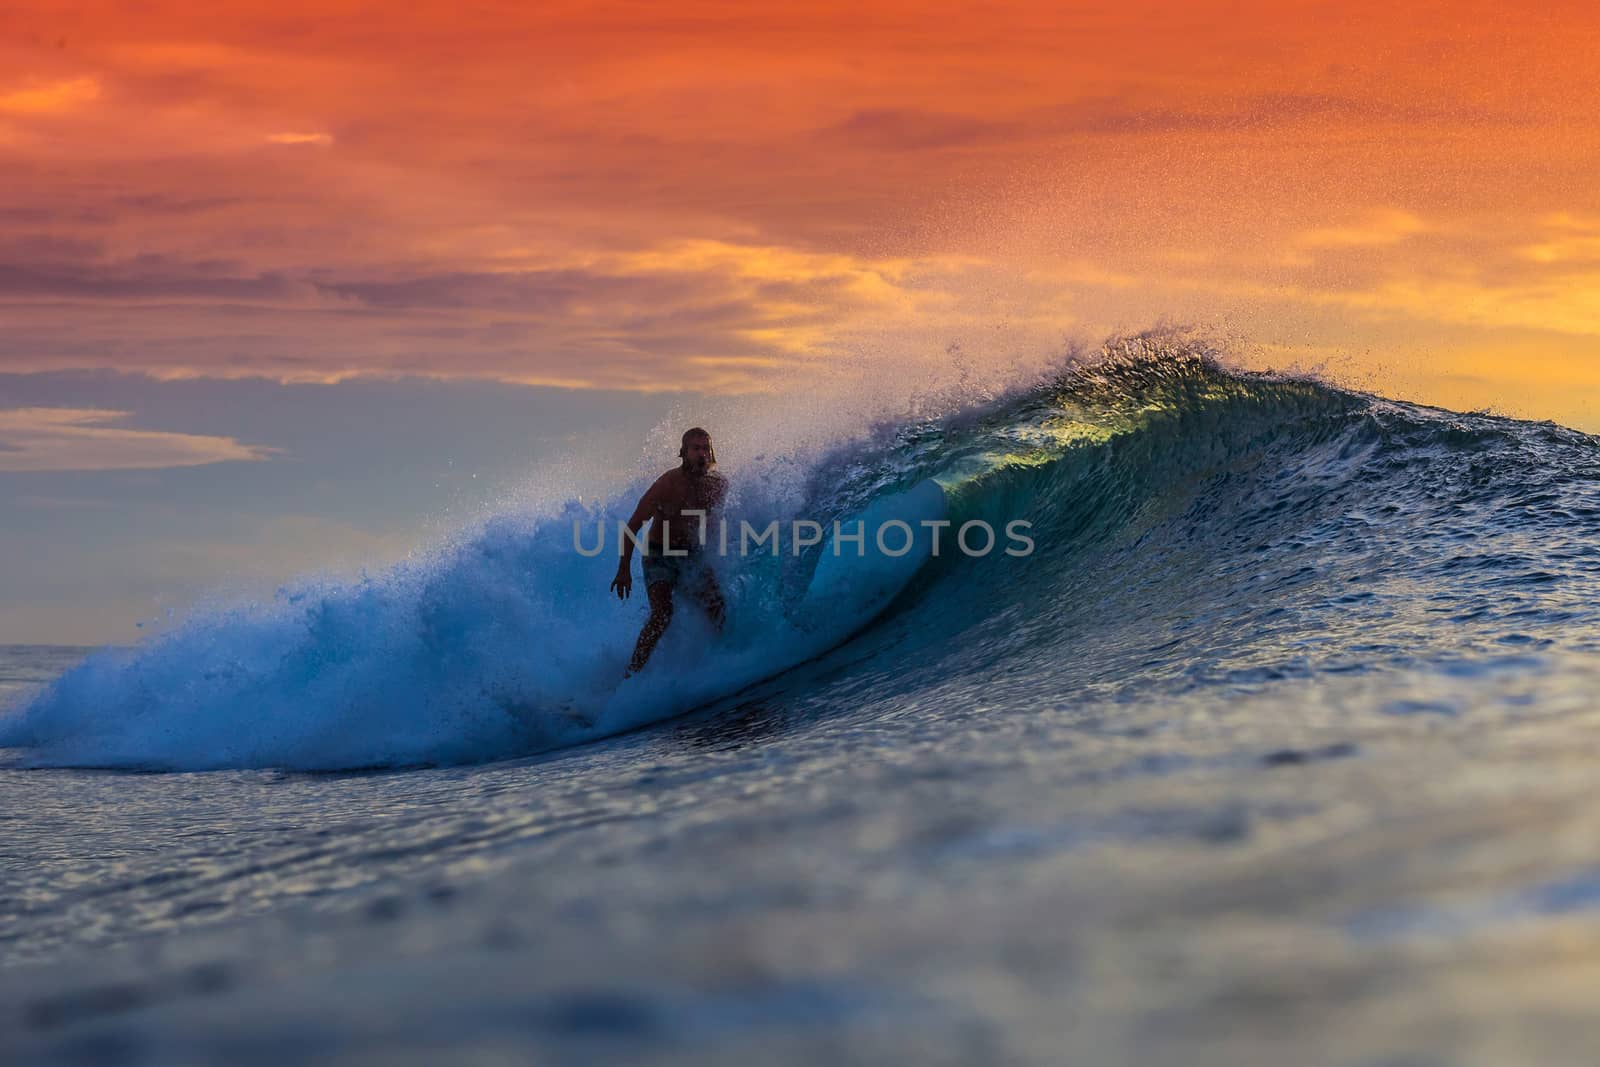 Surfer on Amazing Wave by truphoto